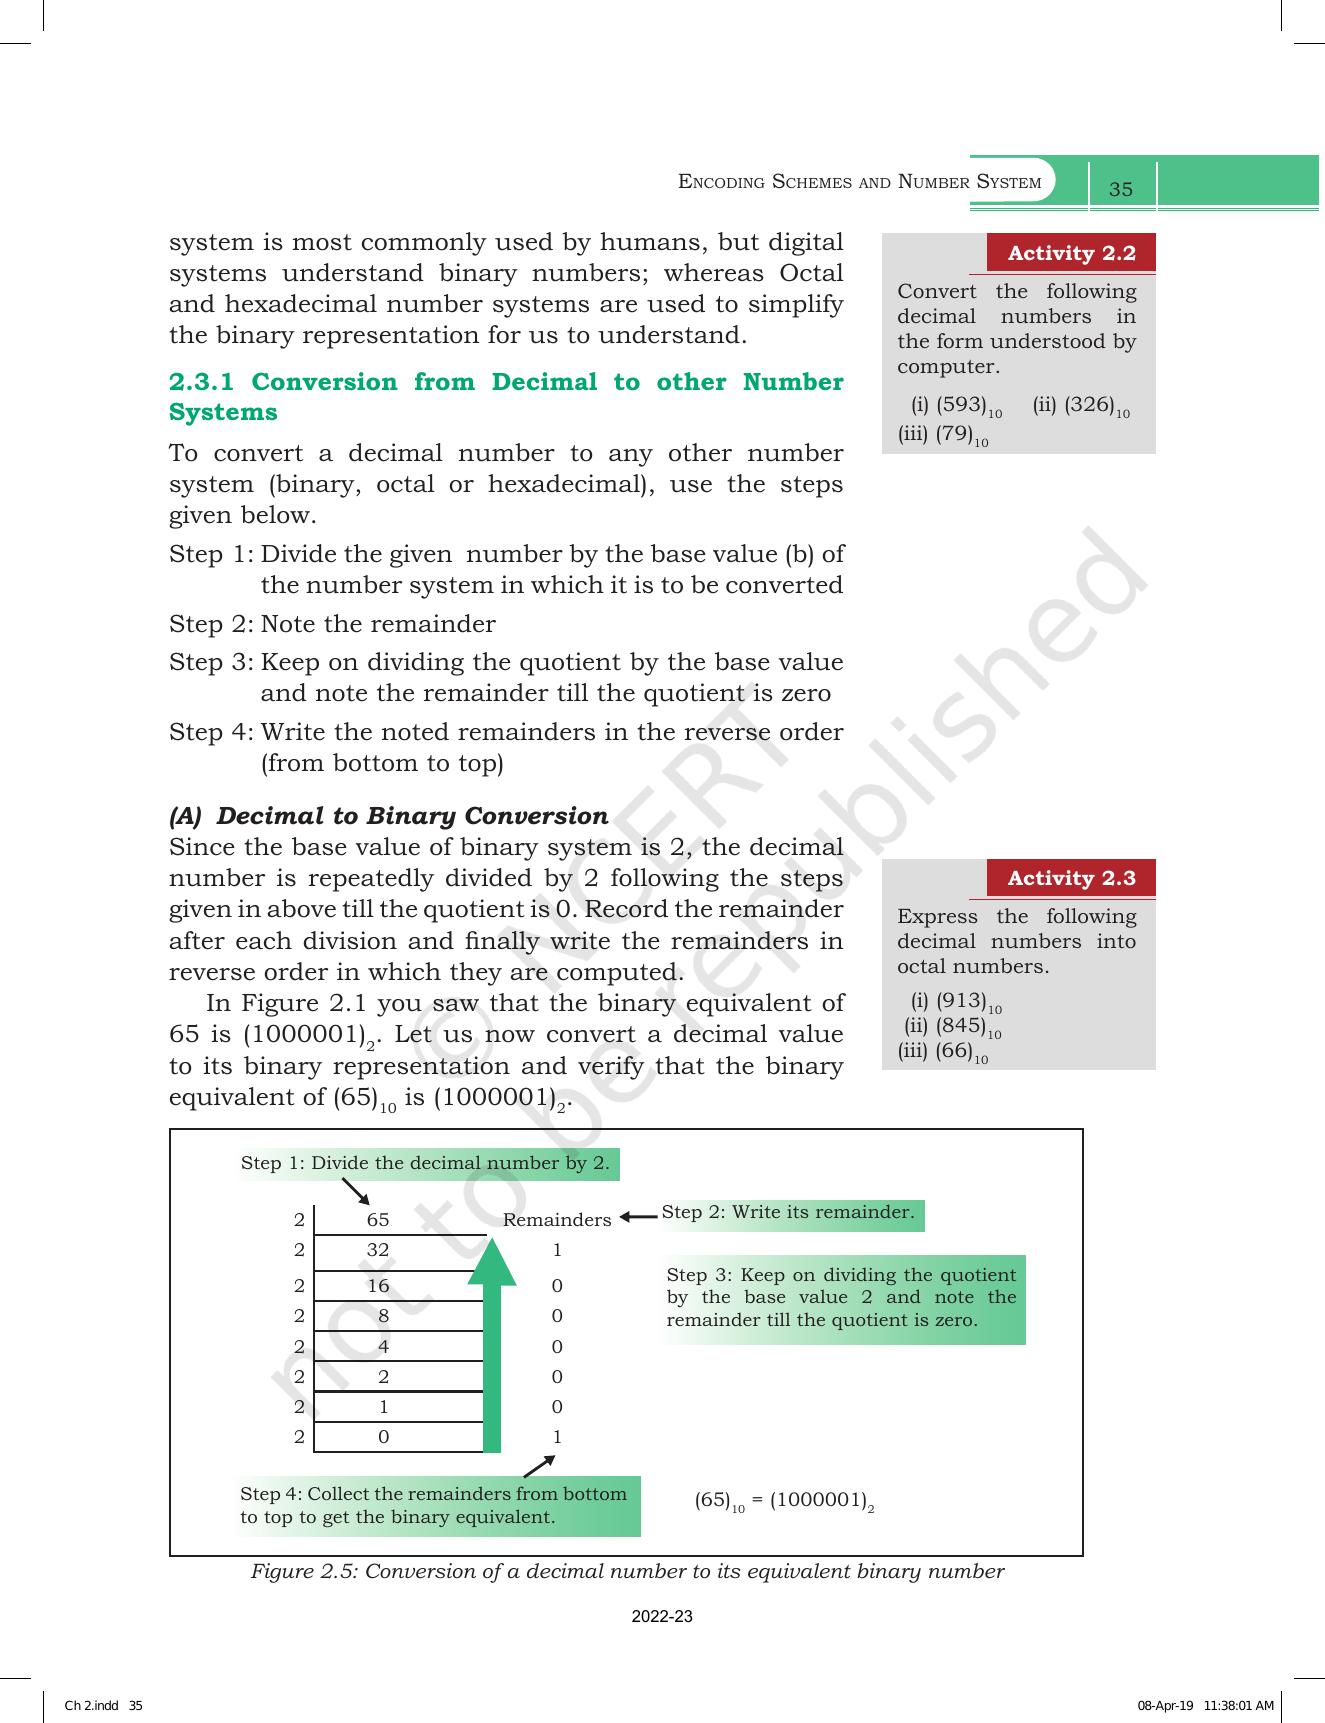 NCERT Book for Class 11 Computer Science Chapter 2 Encoding Schemes and Number System - Page 9